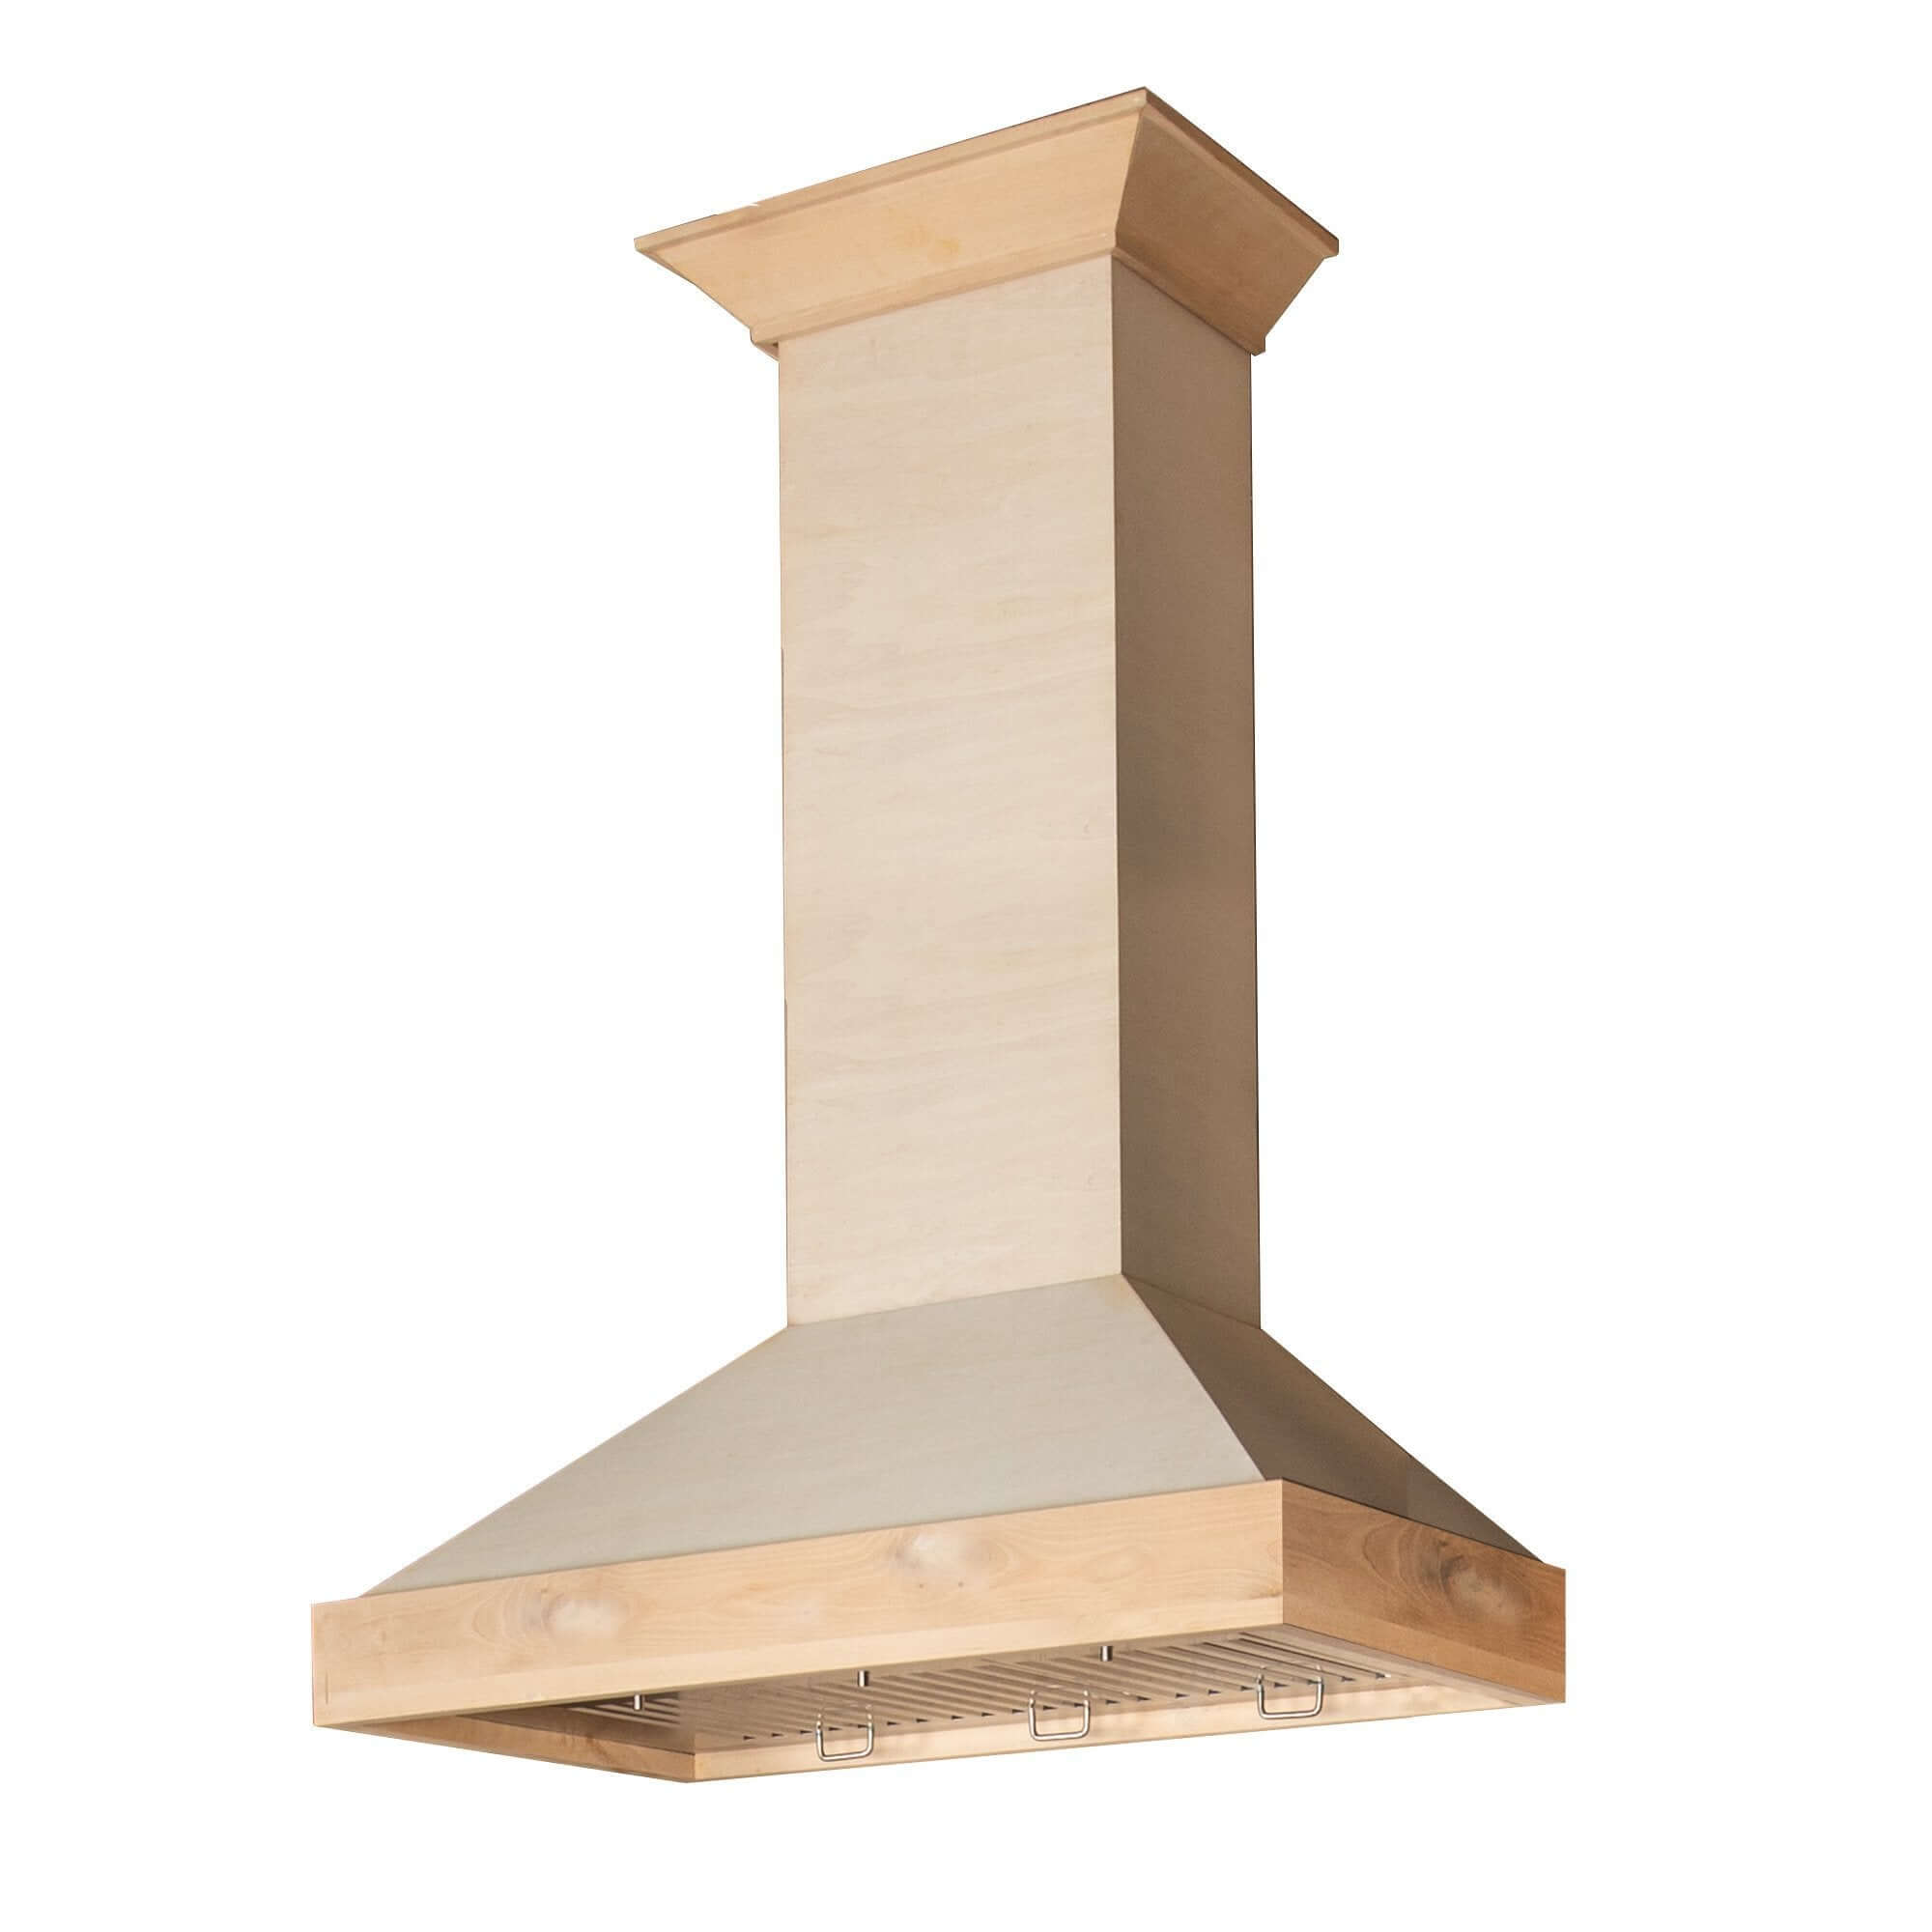 ZLINE Ducted Unfinished Wooden Wall Mount Range Hood (KBUF) Available in 30 Inch, 36 Inch, 42 Inch, and 48 Inch Sizes